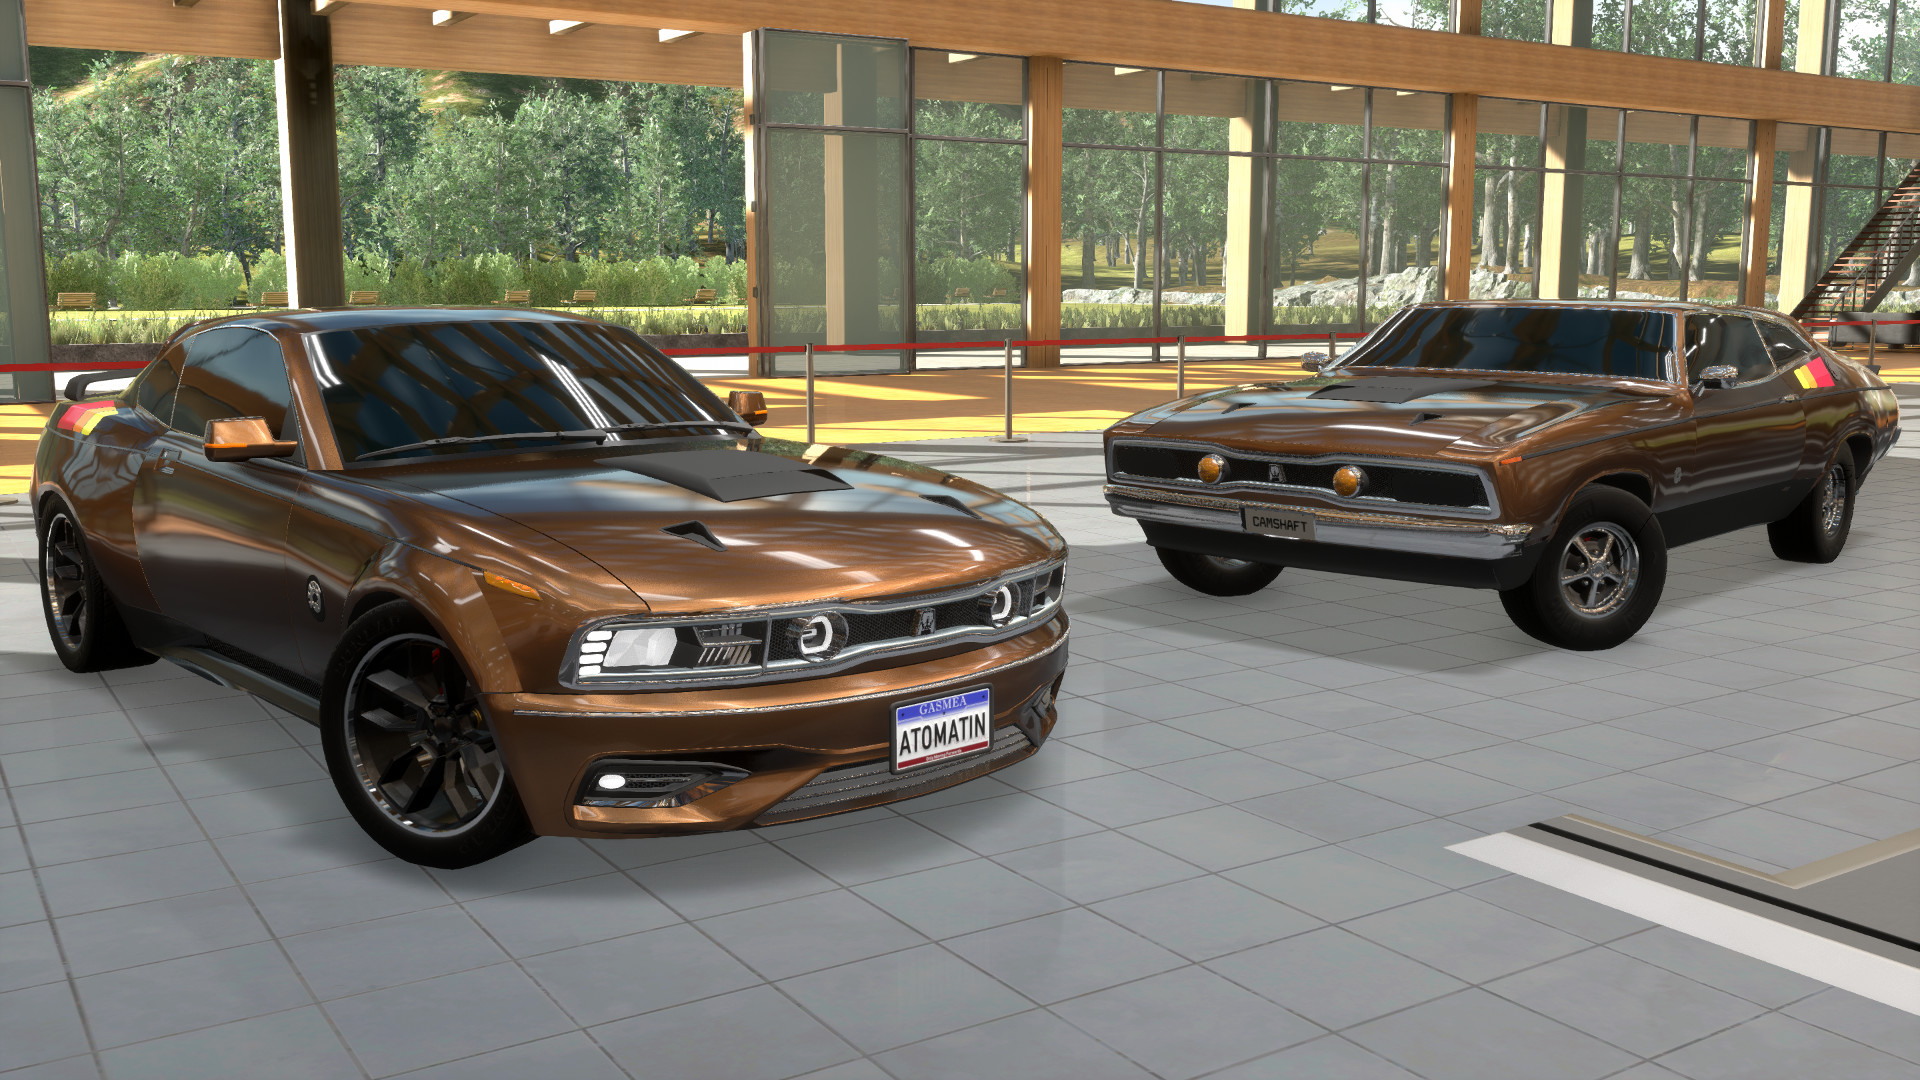 Automation - The Car Company Tycoon Game - screenshot 26